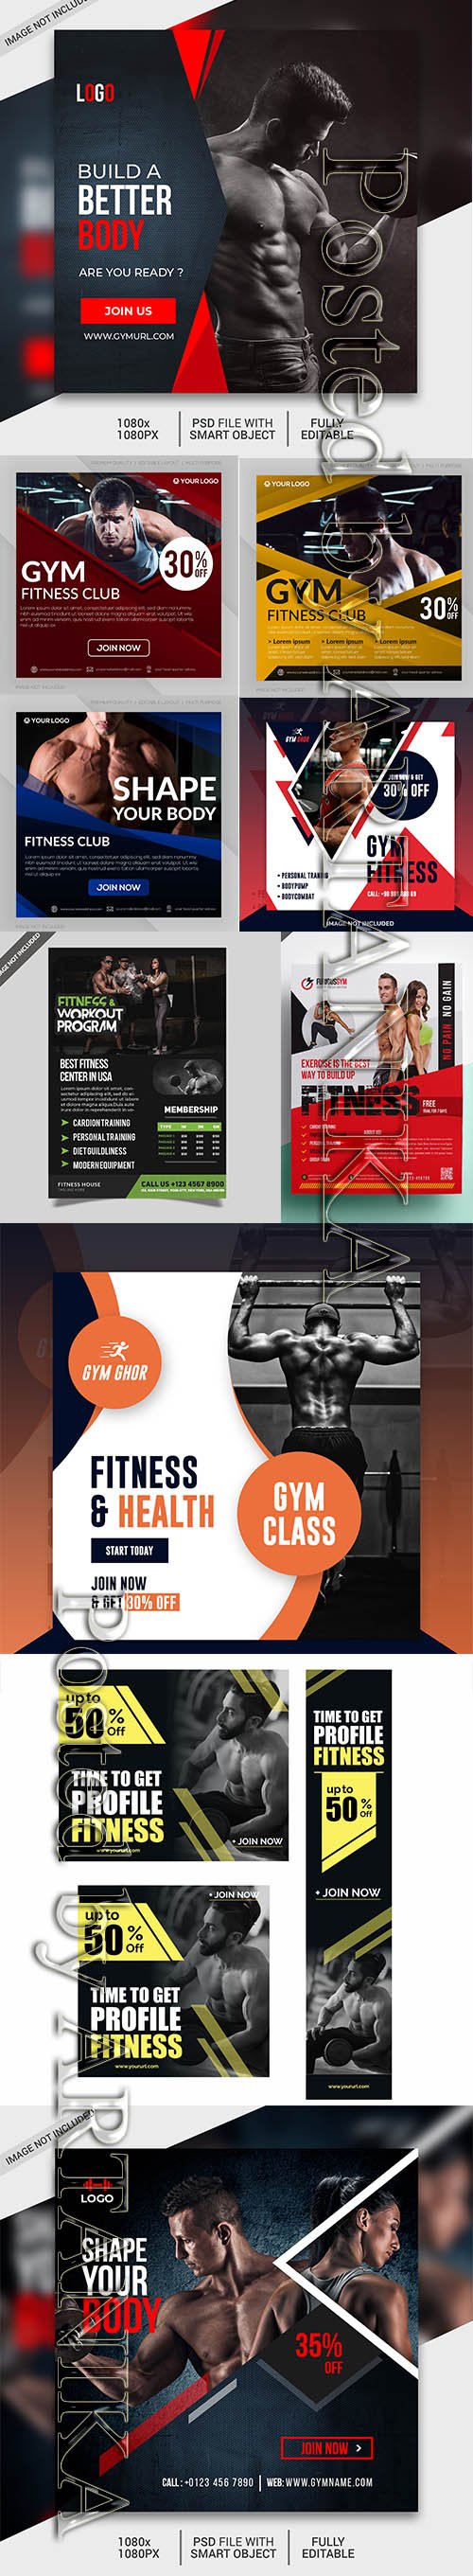 Modern Gym Flyer and Fitness Social Media Post Template Vol 11